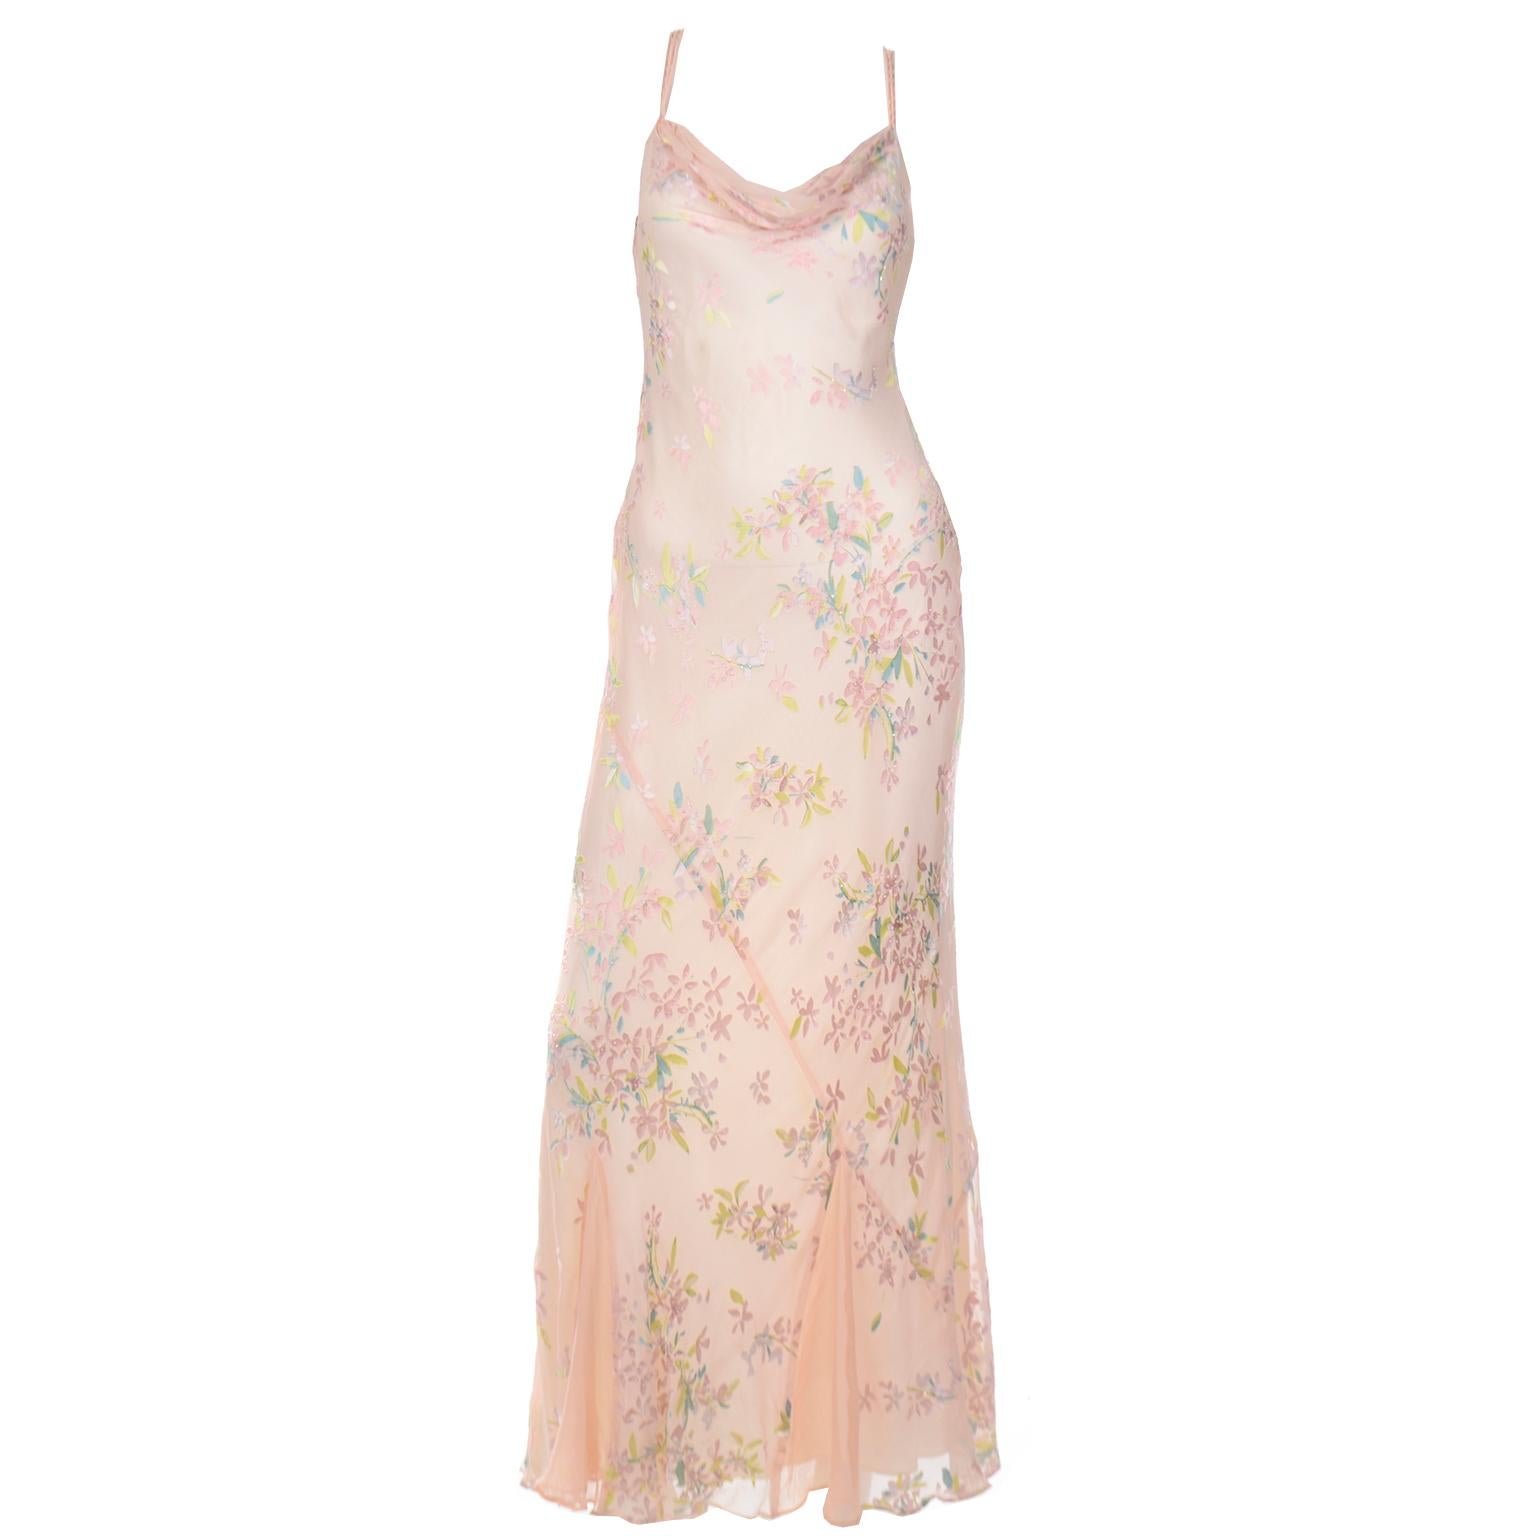 This is a 1930's inspired vintage 1990's evening dress that is cut on the bias and embellished with sequins and beads and a satin floral appliques in pastel shades..The dress is fully lined in taffeta and has triple beaded narrow straps that are